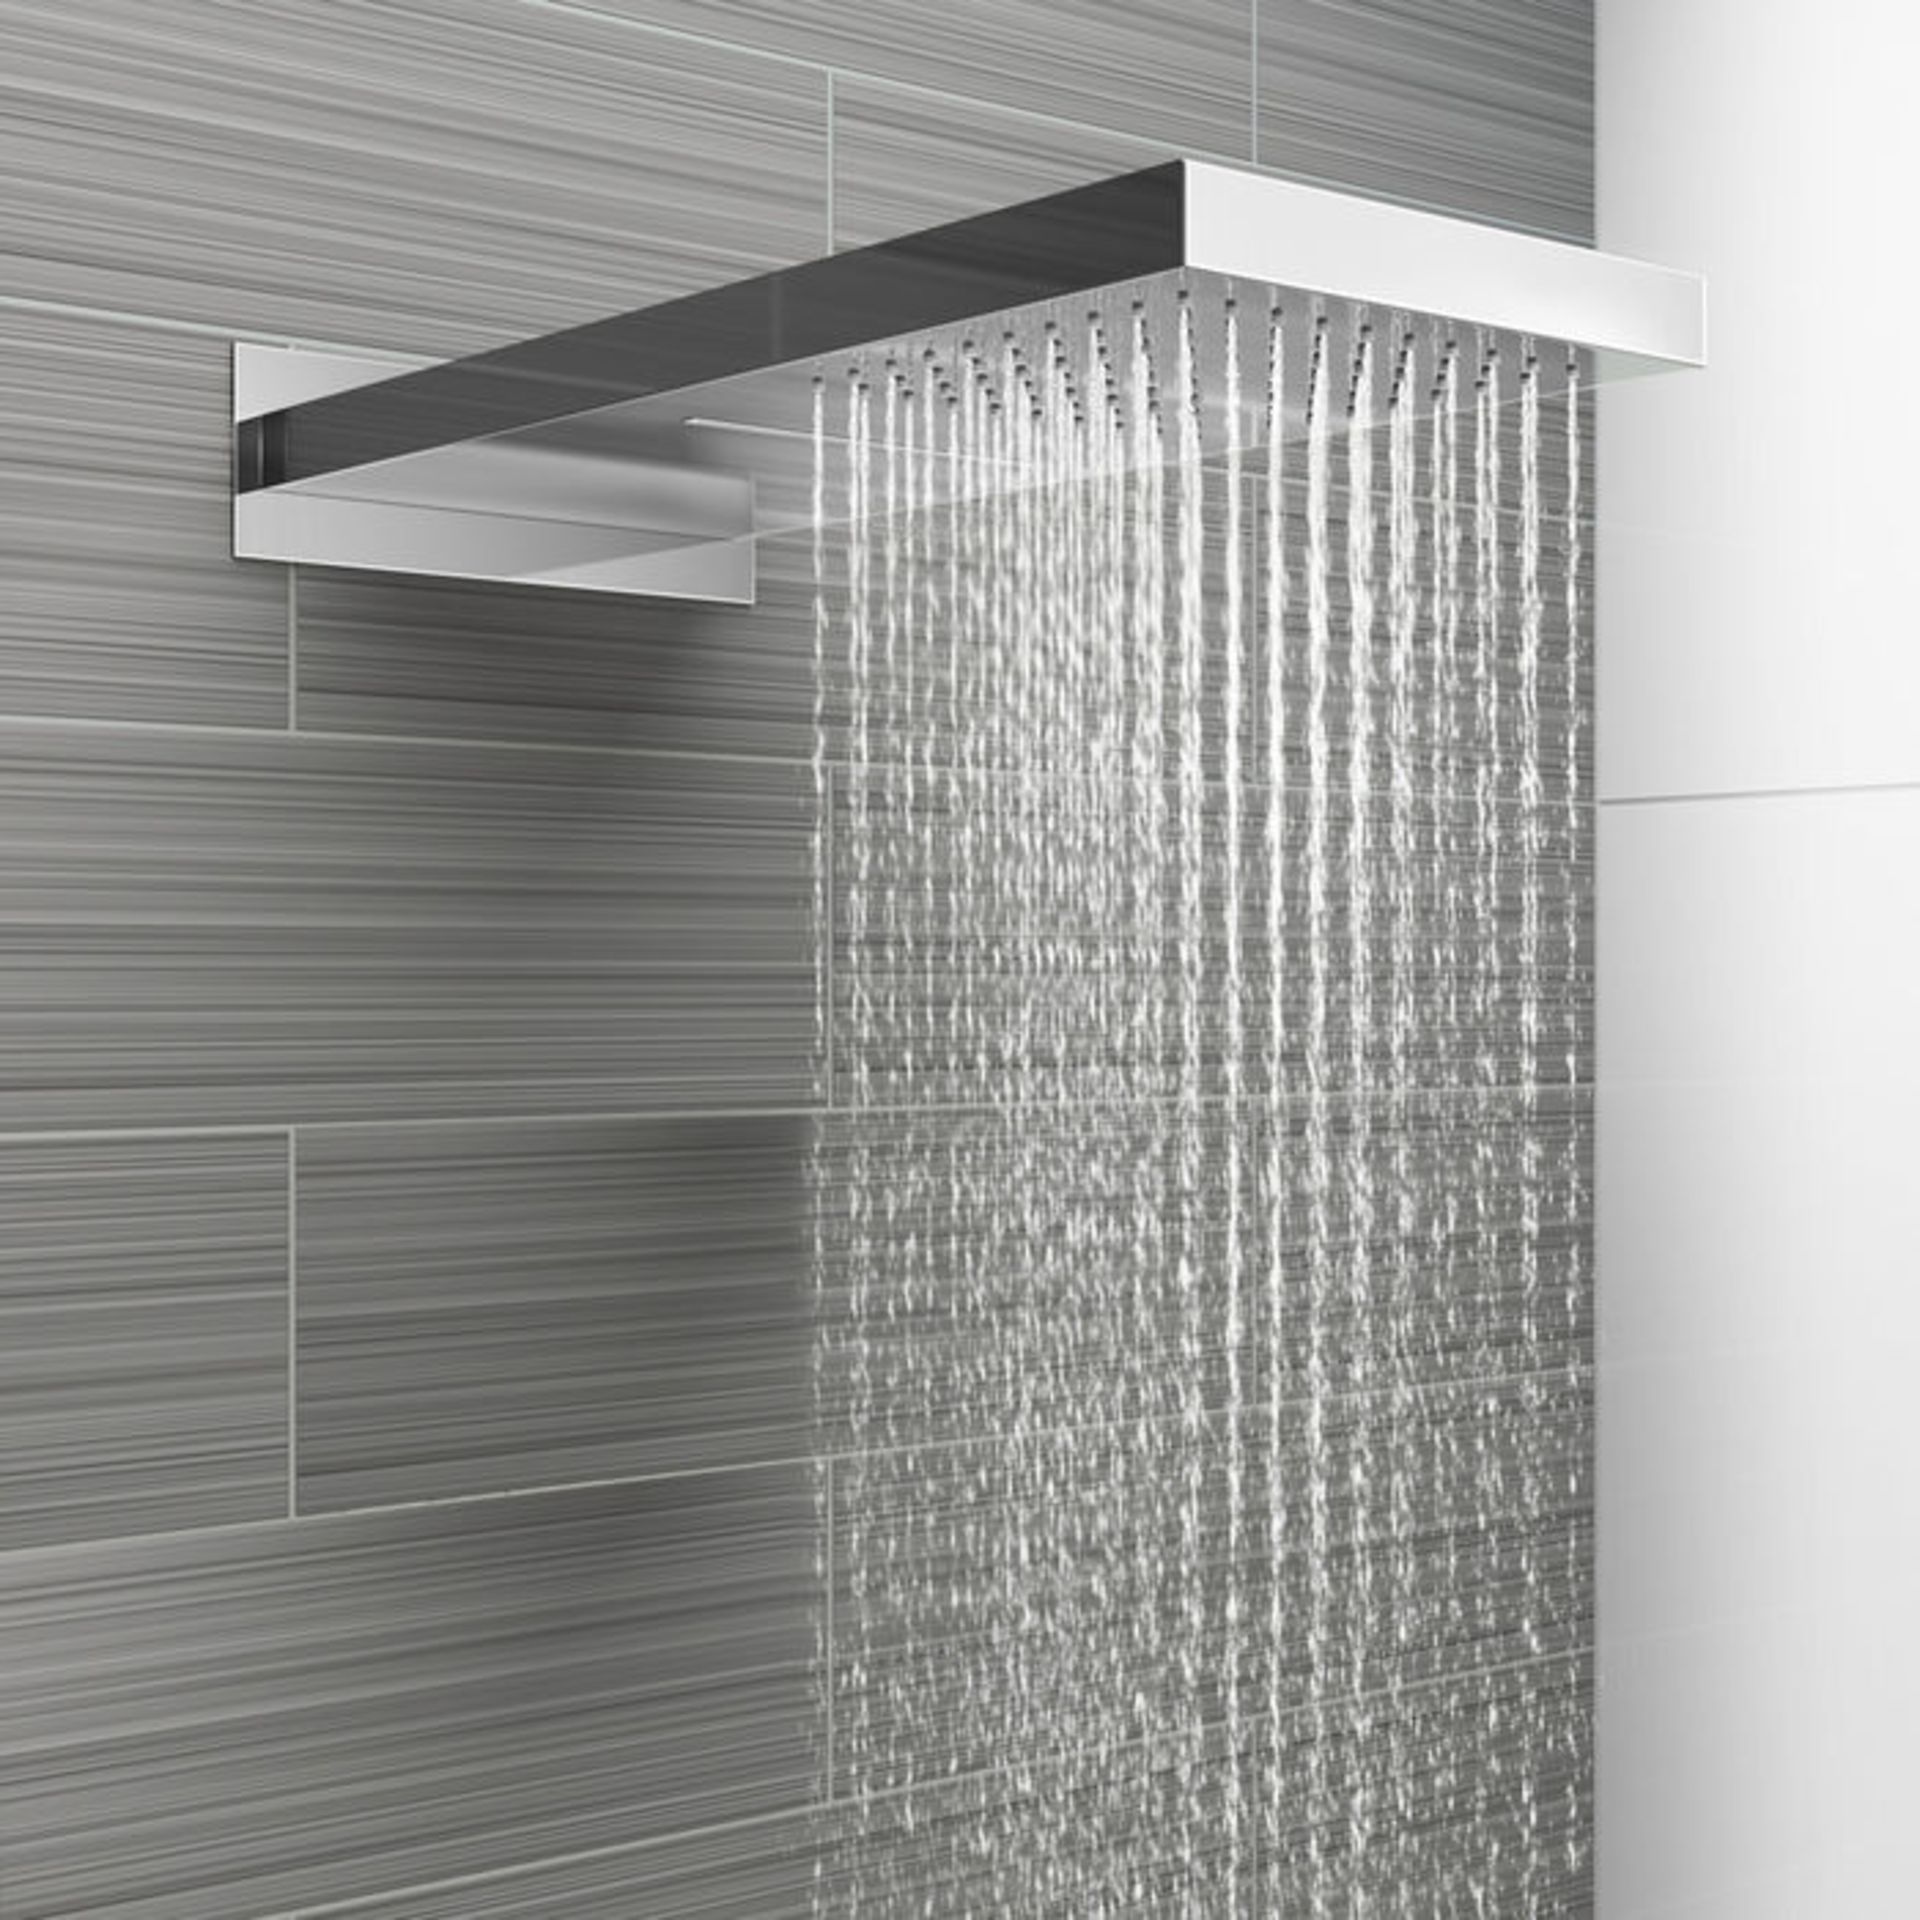 (PP33) 230x500mm Stainless Steel Waterfall Shower Head. RRP £374.98. Dual function waterfall ... - Image 3 of 4